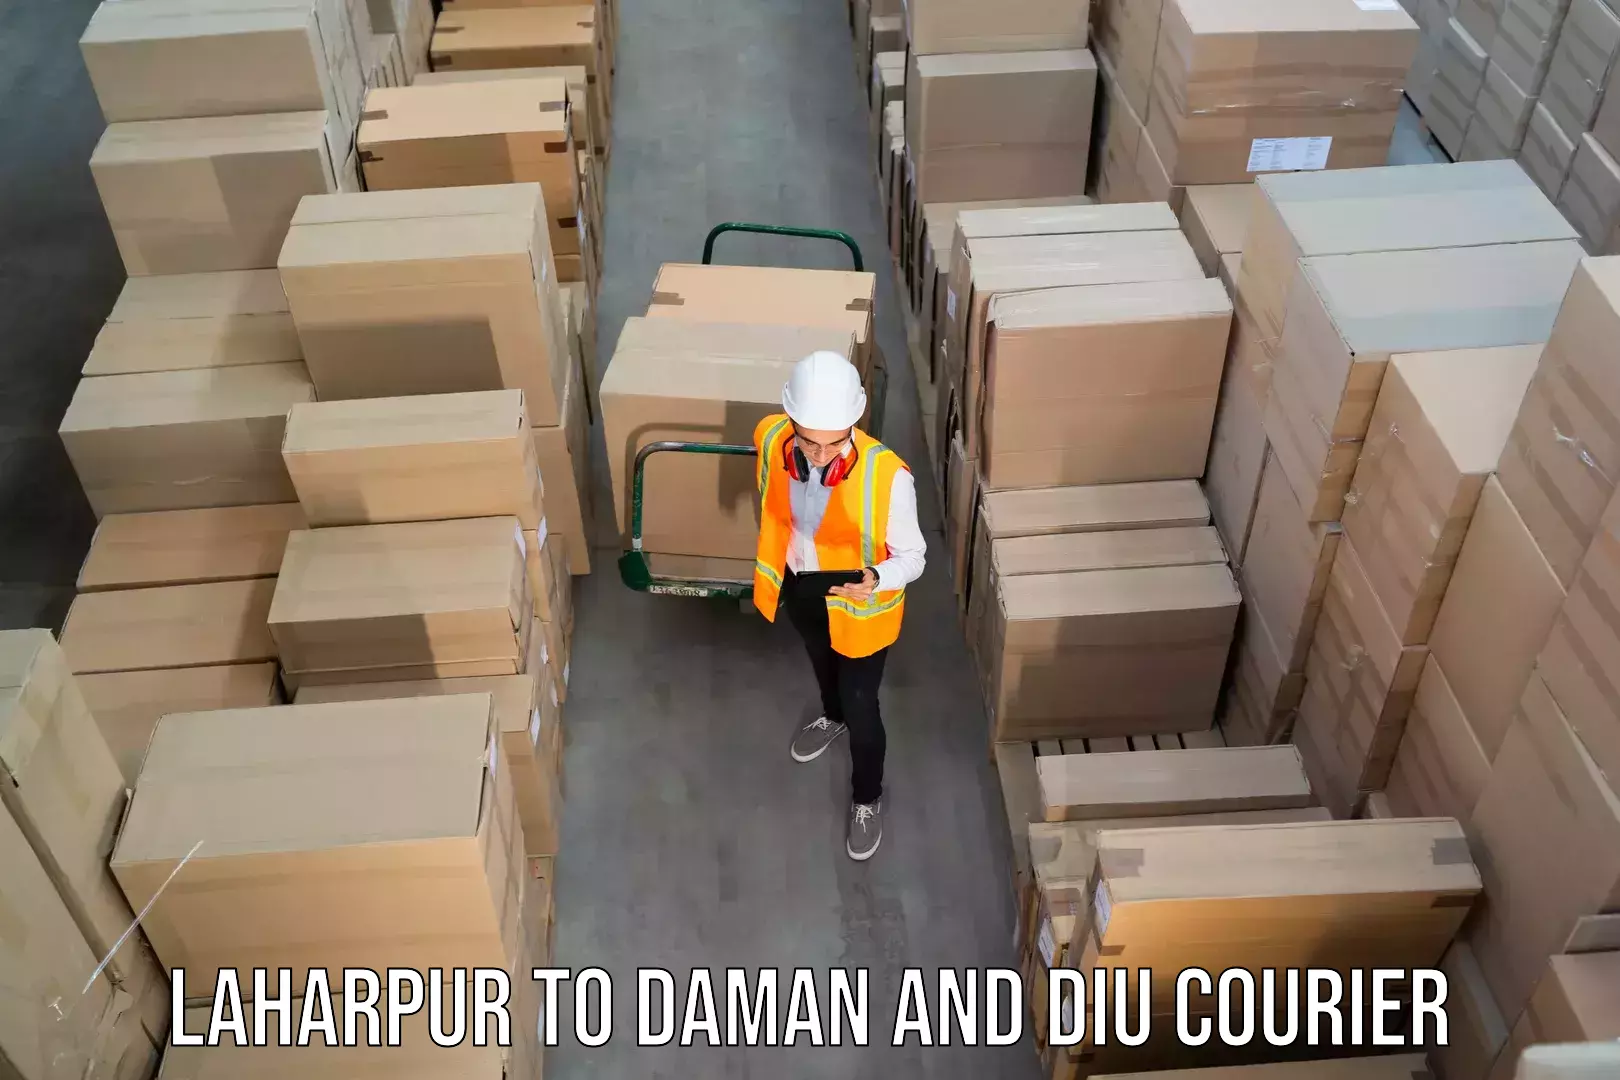 Remote area delivery Laharpur to Diu